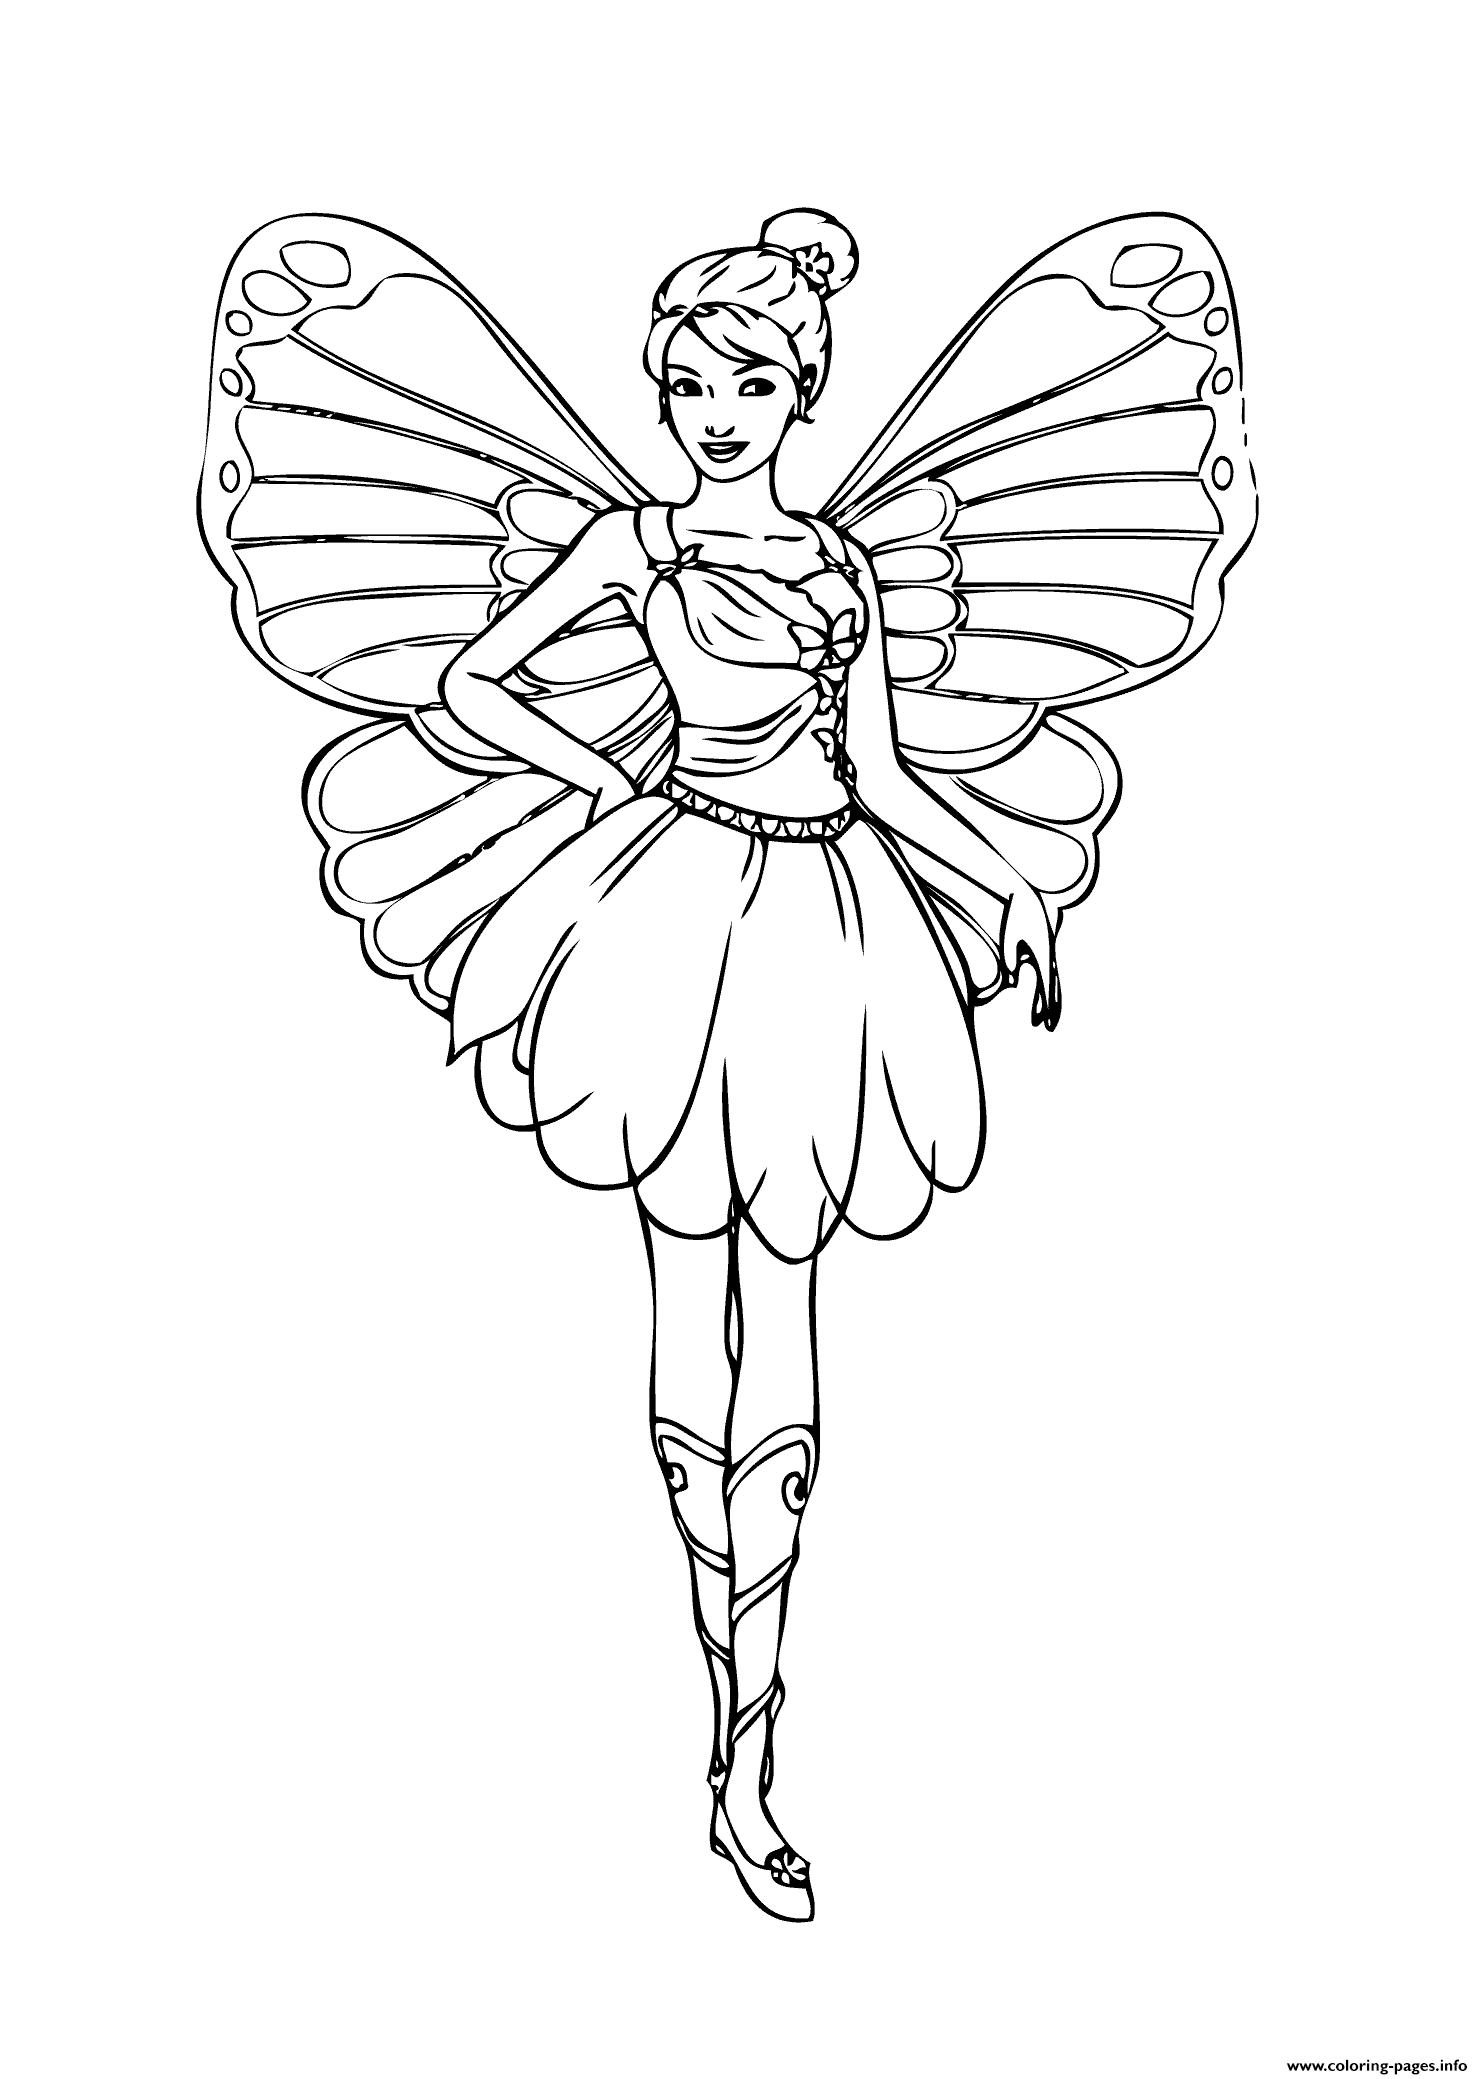 Barbie Fairy Coloring Pages Printable